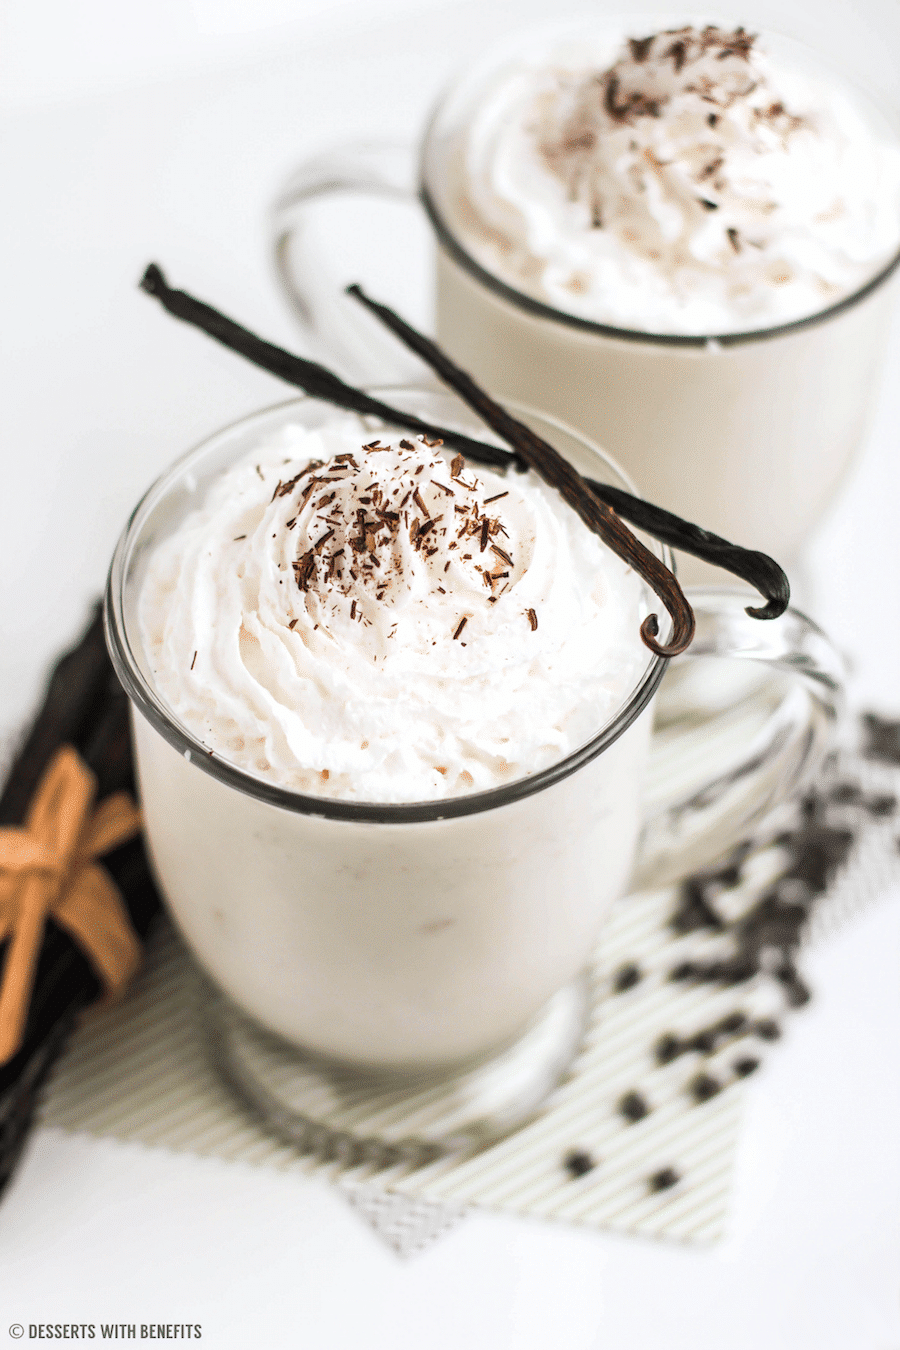 If you're craving Starbucks Frappuccinos but don't have the time or patience to stand in line, make this low fat, healthy Homemade Vanilla Bean Frappuccino!